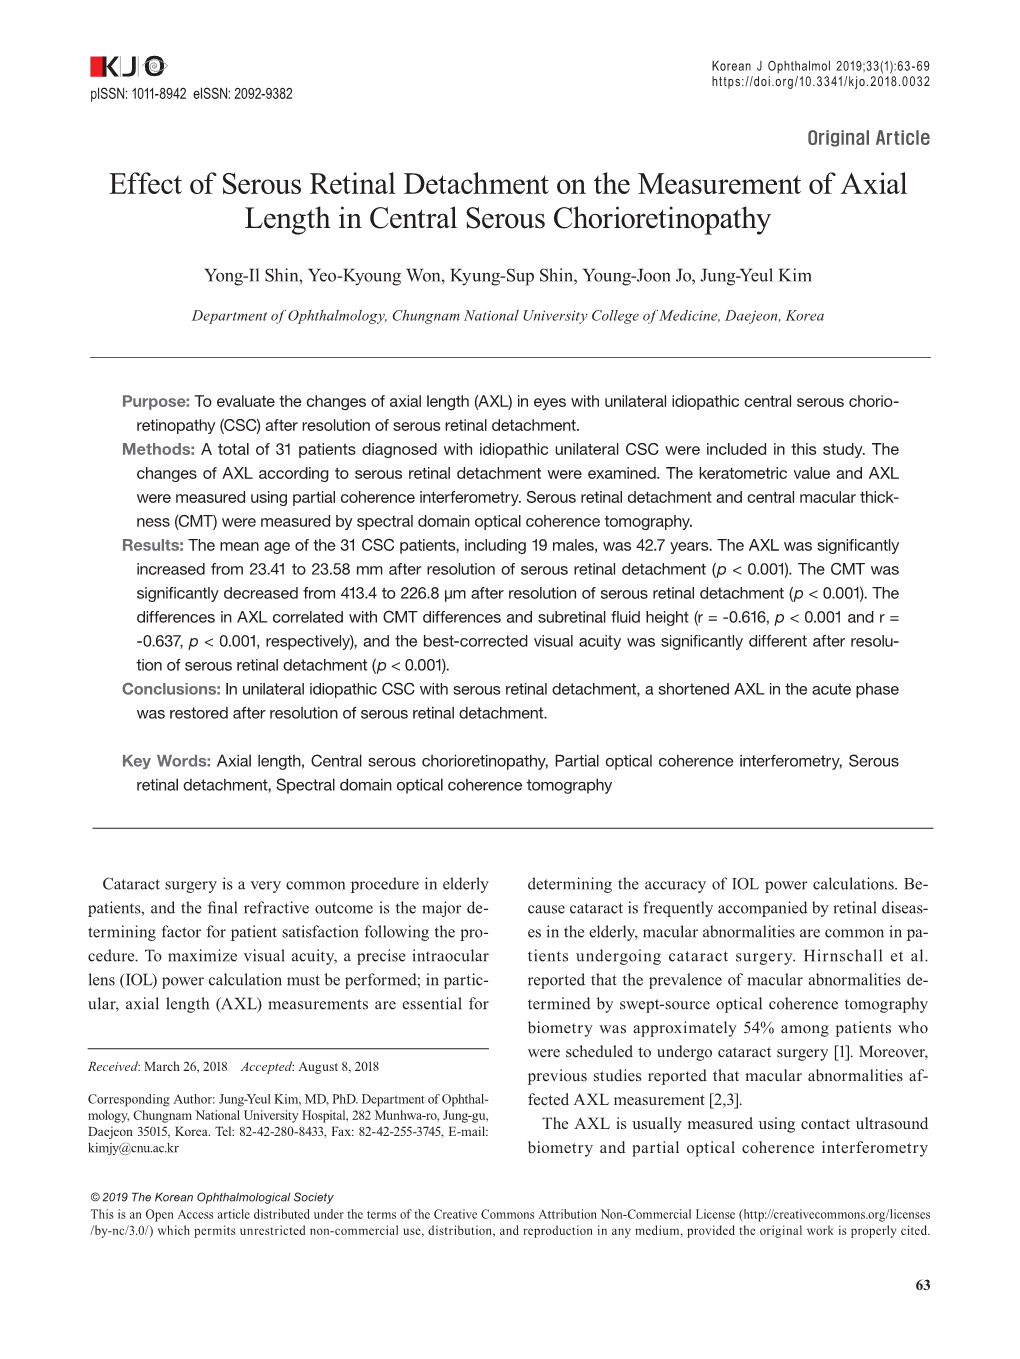 Effect of Serous Retinal Detachment on the Measurement of Axial Length in Central Serous Chorioretinopathy